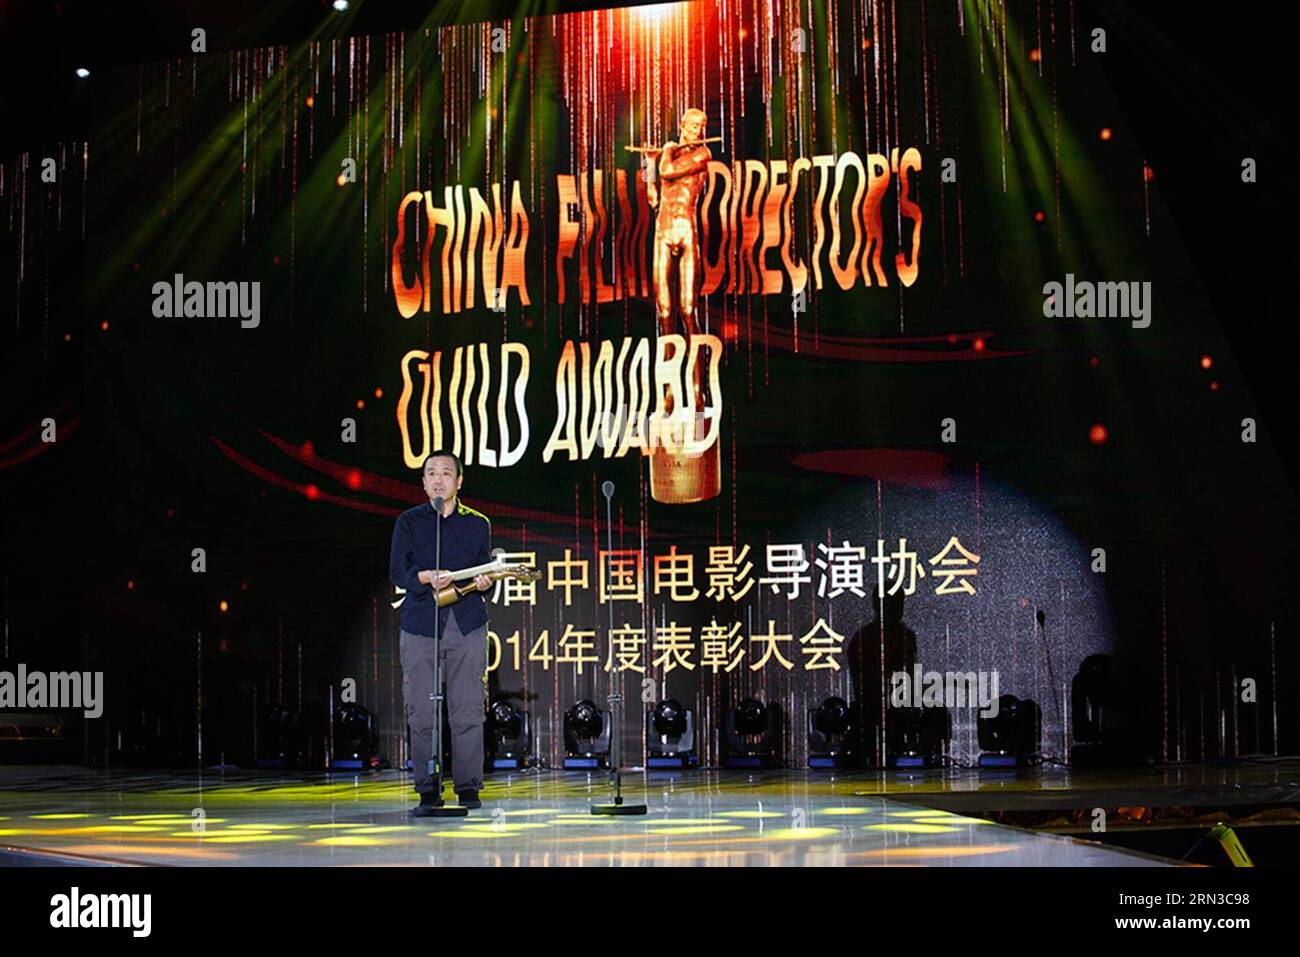 Director Lou Ye, winner of the Director of the Year award for his movie Blind Massage , speaks at the 2014 annual awarding conference of China Film Directors Guild in Beijing, capital of China, April 12, 2015. ) (ytt) CHINA-BEIJING-FILM DIRECTORS GUILD(CN) JinxLiangkuai PUBLICATIONxNOTxINxCHN   Director Lou Ye Winner of The Director of The Year Award for His Movie Blind Massage Speaks AT The 2014 Annual awarding Conference of China Film Directors Guild in Beijing Capital of China April 12 2015  China Beijing Film Directors Guild CN JinxLiangkuai PUBLICATIONxNOTxINxCHN Stock Photo